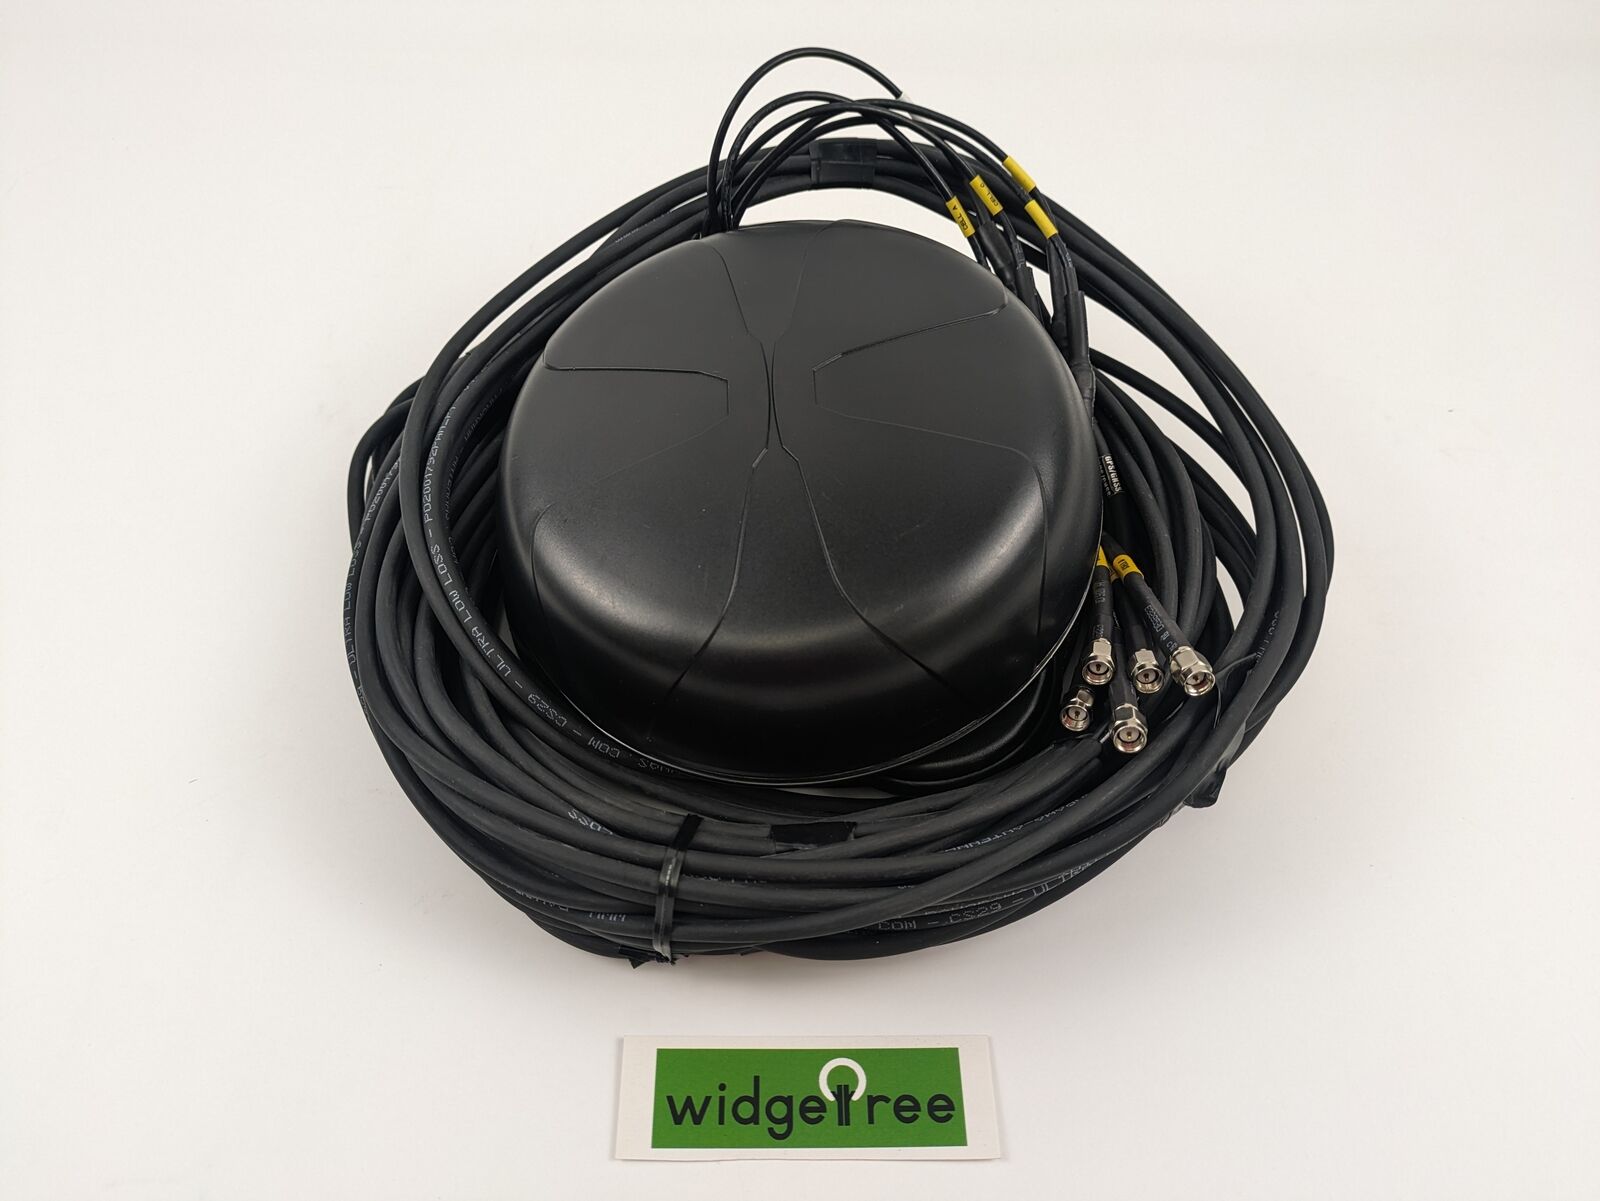 Panorama 5-in-1 16' 4x4 MIMO 4G LTE & GPS Antenna Kit - LG-IN2383